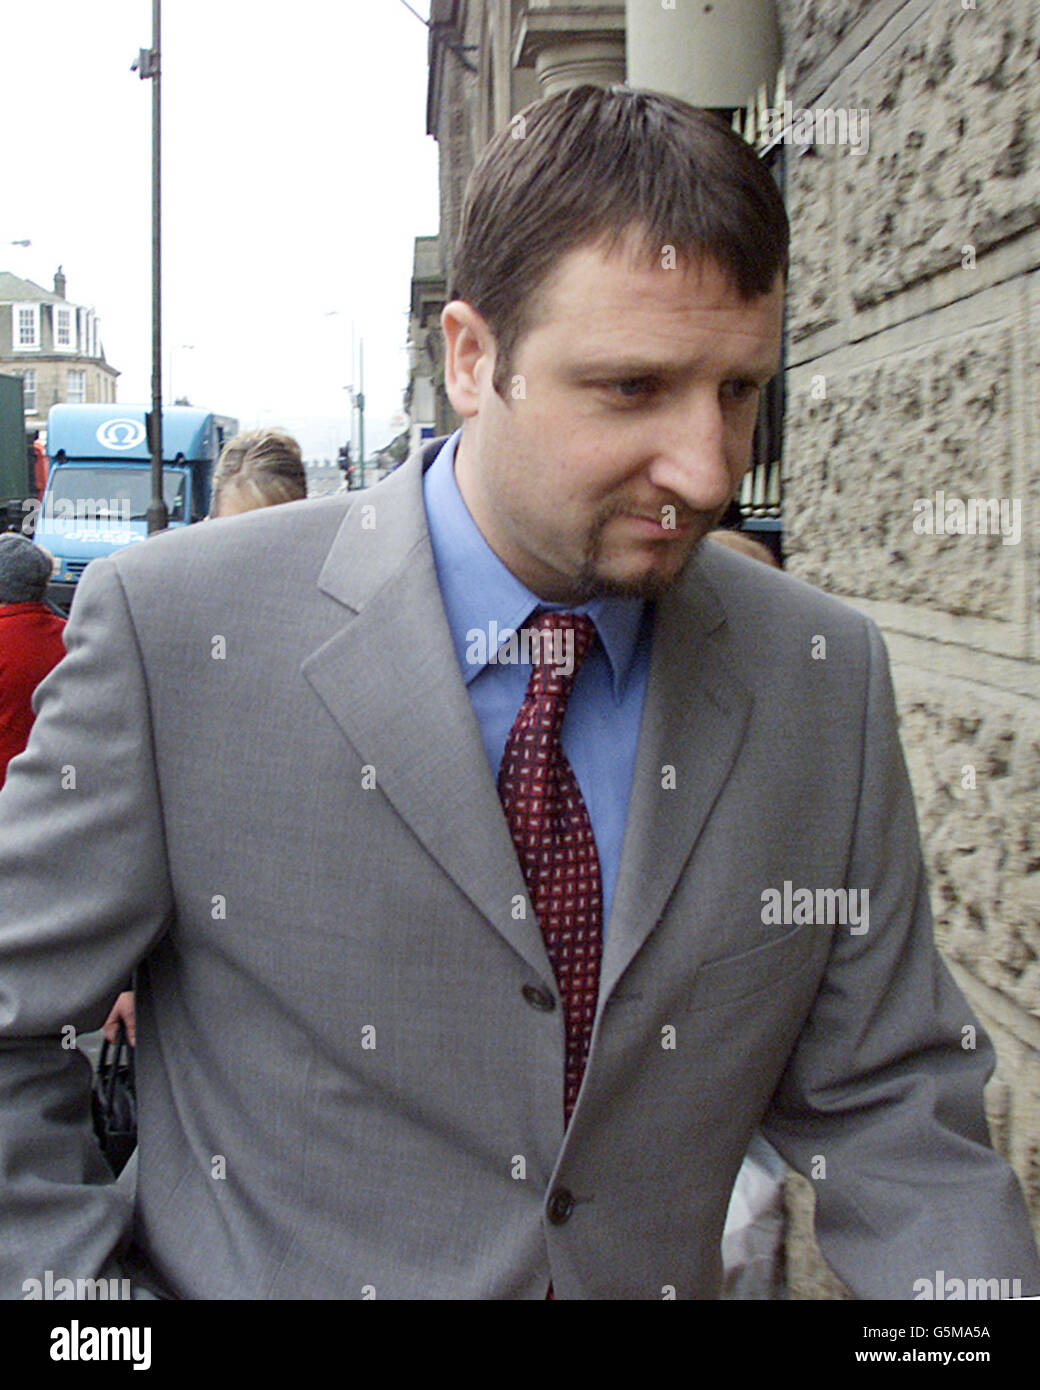 Lee Martin, 33, arrives at Glossop magistrates court Friday January 11, 2001, where he was sentenced to 180 hours community service and ordered to pay 522 costs after admitting benefit fraud. Lee scored the winning goal in the 1990 FA Cup final to defeat Crystal Palace and deliver the first trophy of Sir Alex's glittering managerial career at Old Trafford. He quit football in 1998 after failing to recover from a back operation. See PA story COURTS Martin. PA photo: Martin Ricketts. Stock Photo